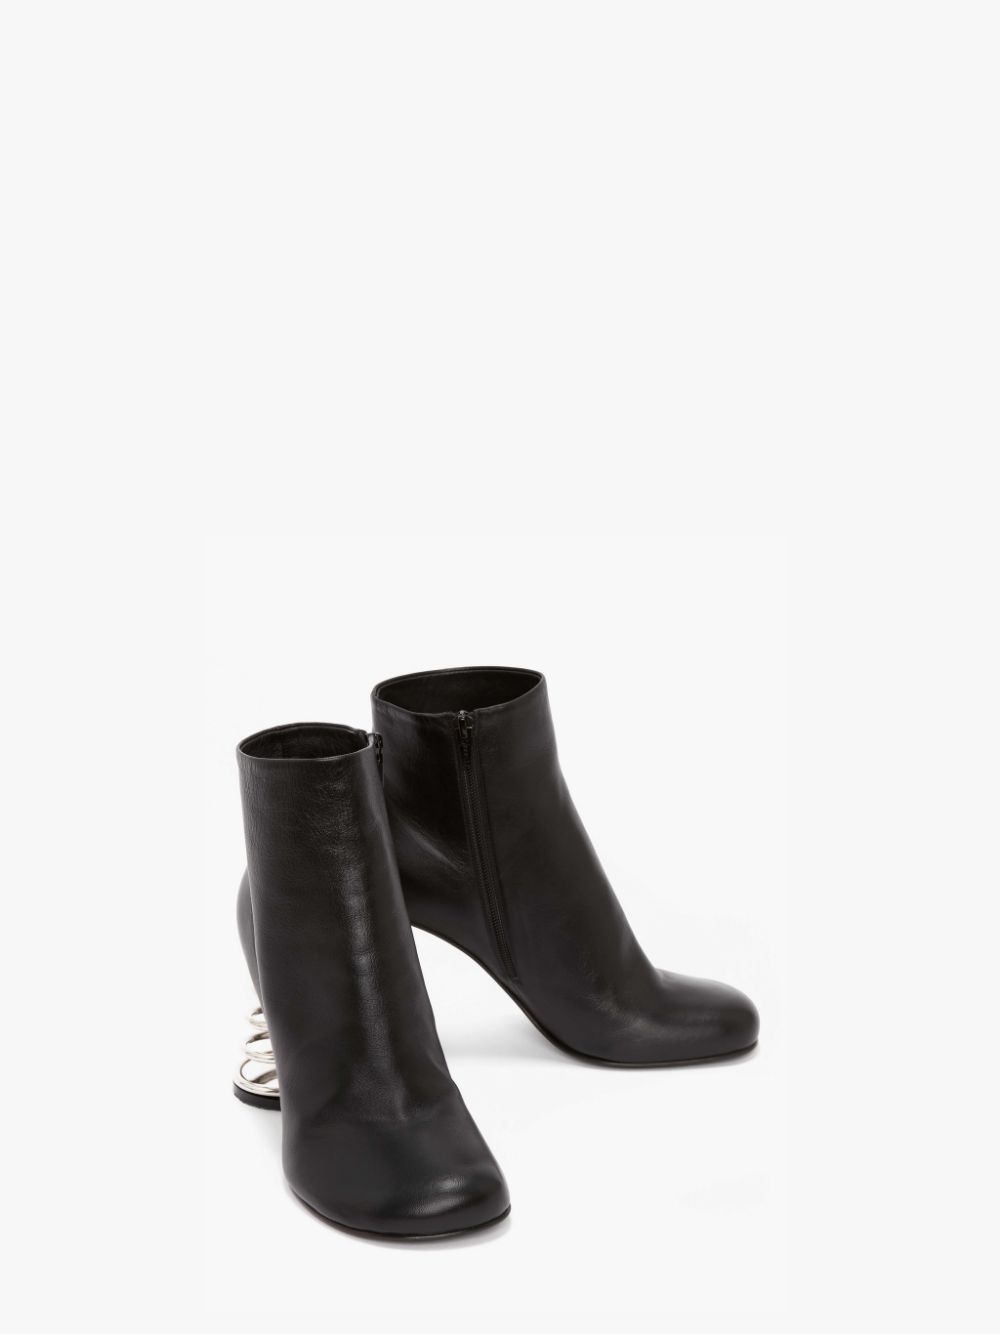 LEATHER SPIRAL HEEL ANKLE BOOT - 2